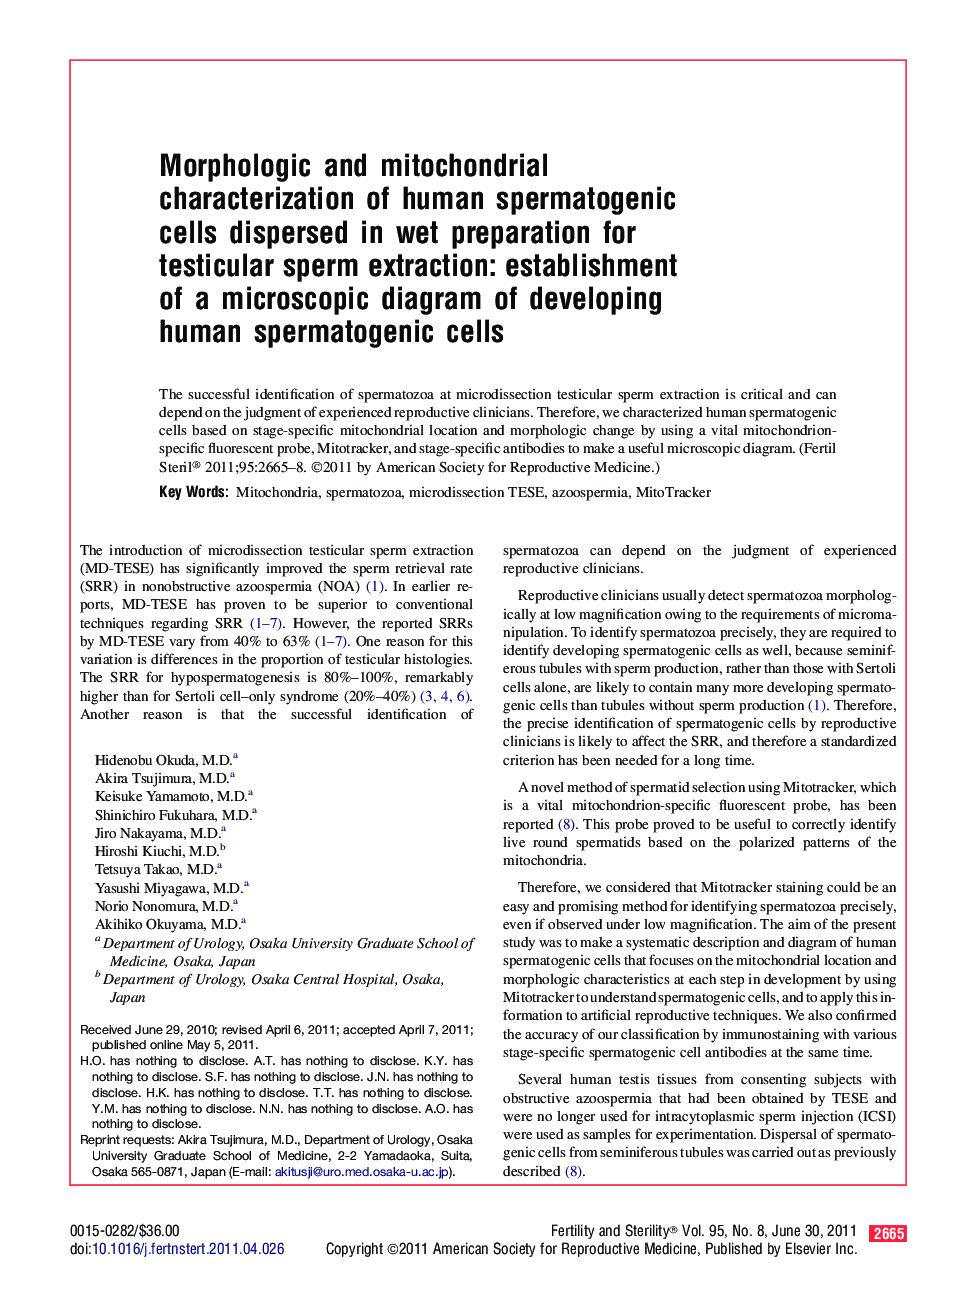 Morphologic and mitochondrial characterization of human spermatogenic cells dispersed in wet preparation for testicular sperm extraction: establishment of a microscopic diagram of developing human spermatogenic cells 